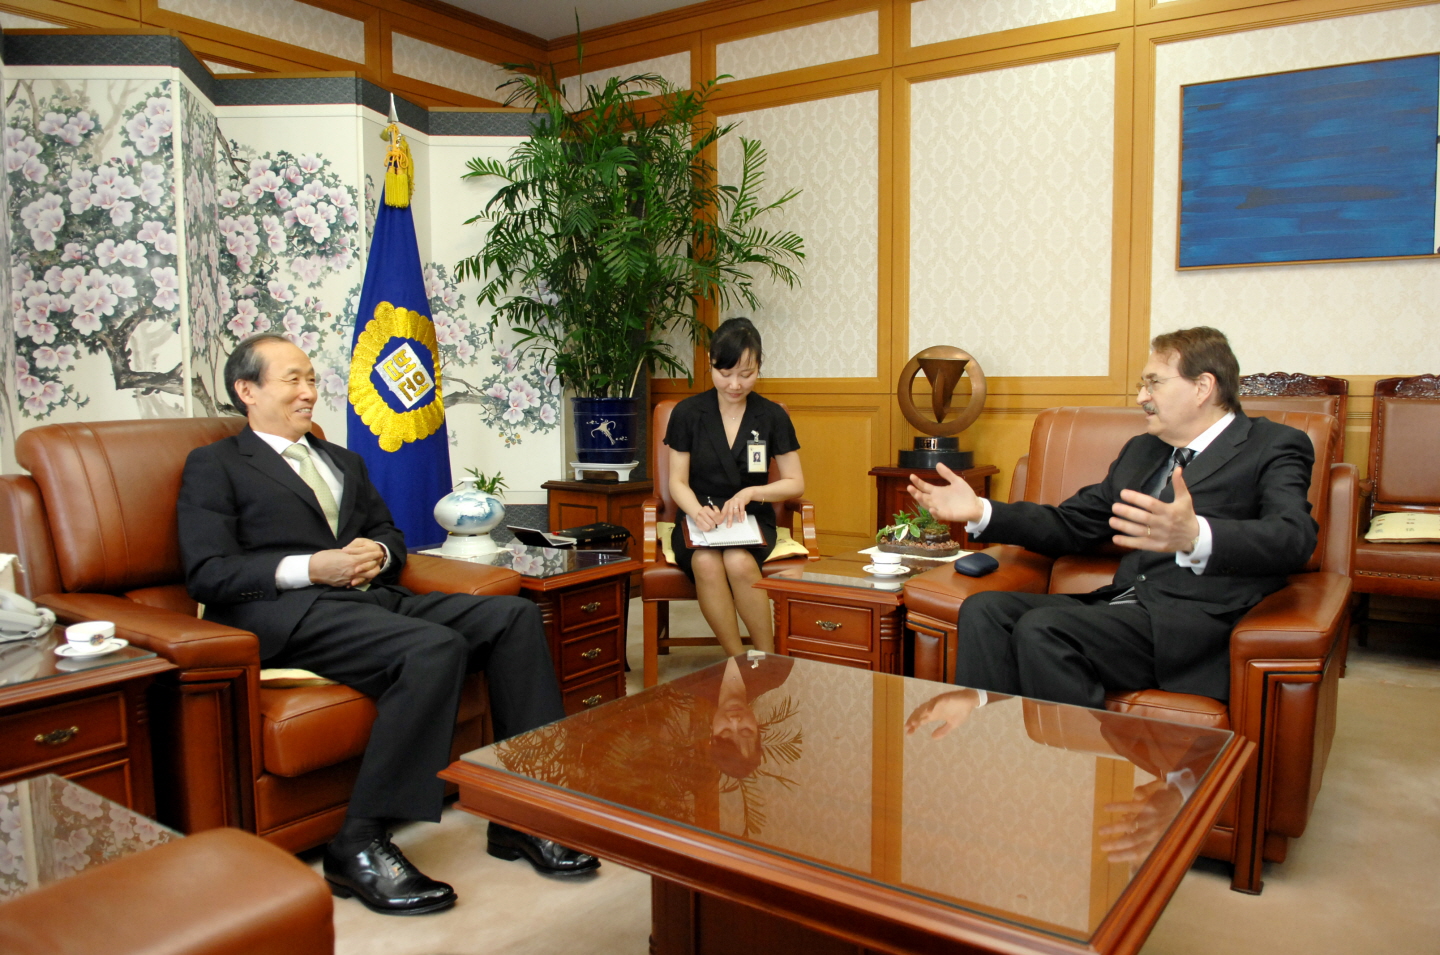 [07_08_09]Ambassador of Australia pays a Courtesy call on the Chief Justice